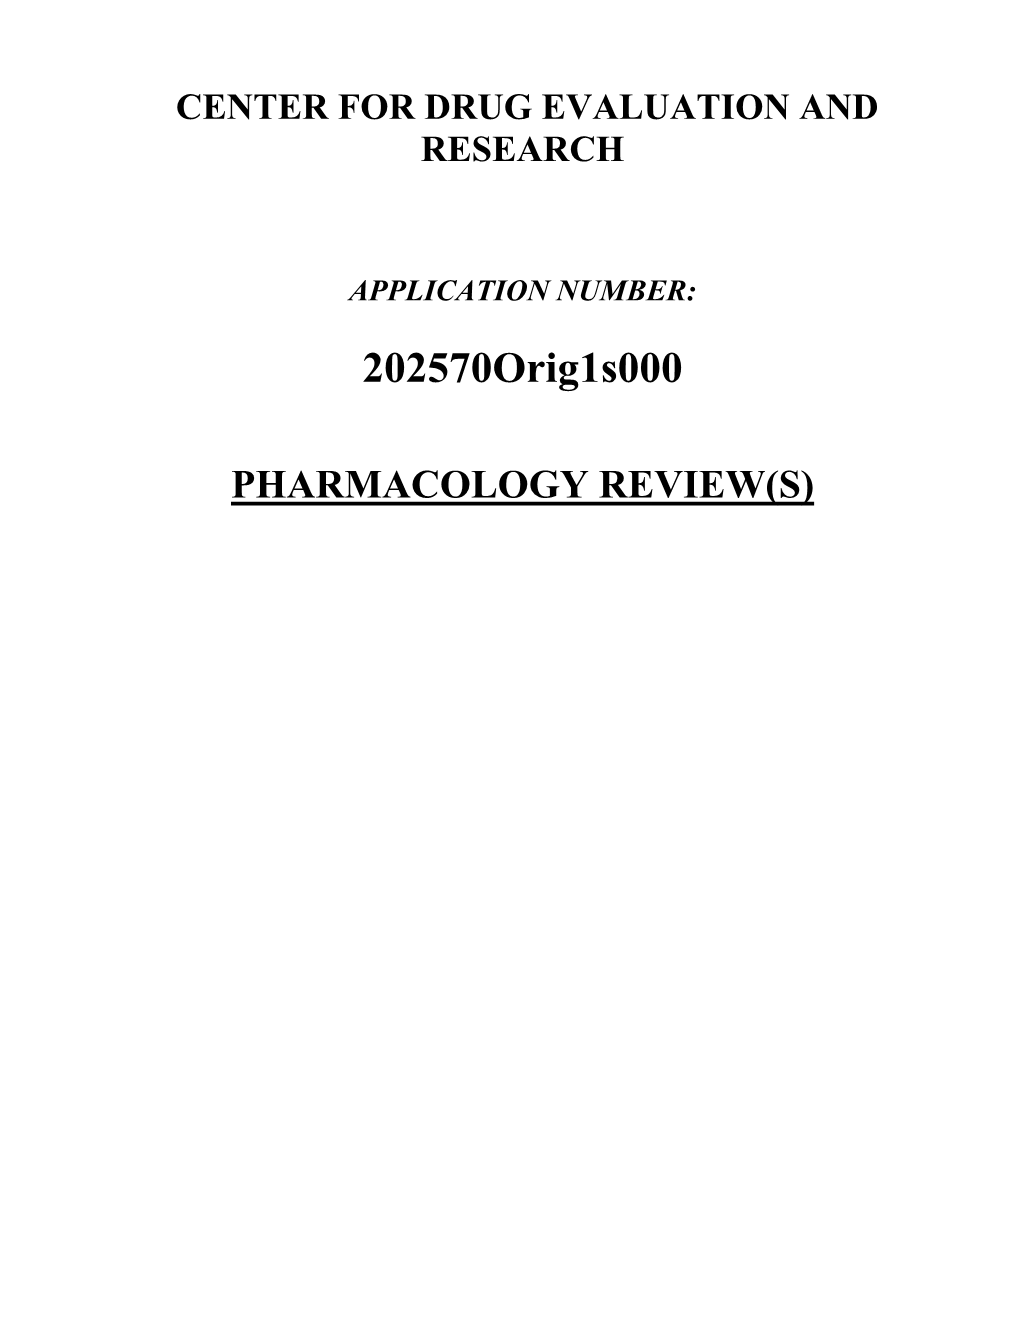 Pharmacology Review(S) Department of Health and Human Services Public Health Service Food and Drug Administration Center for Drug Evaluation and Research